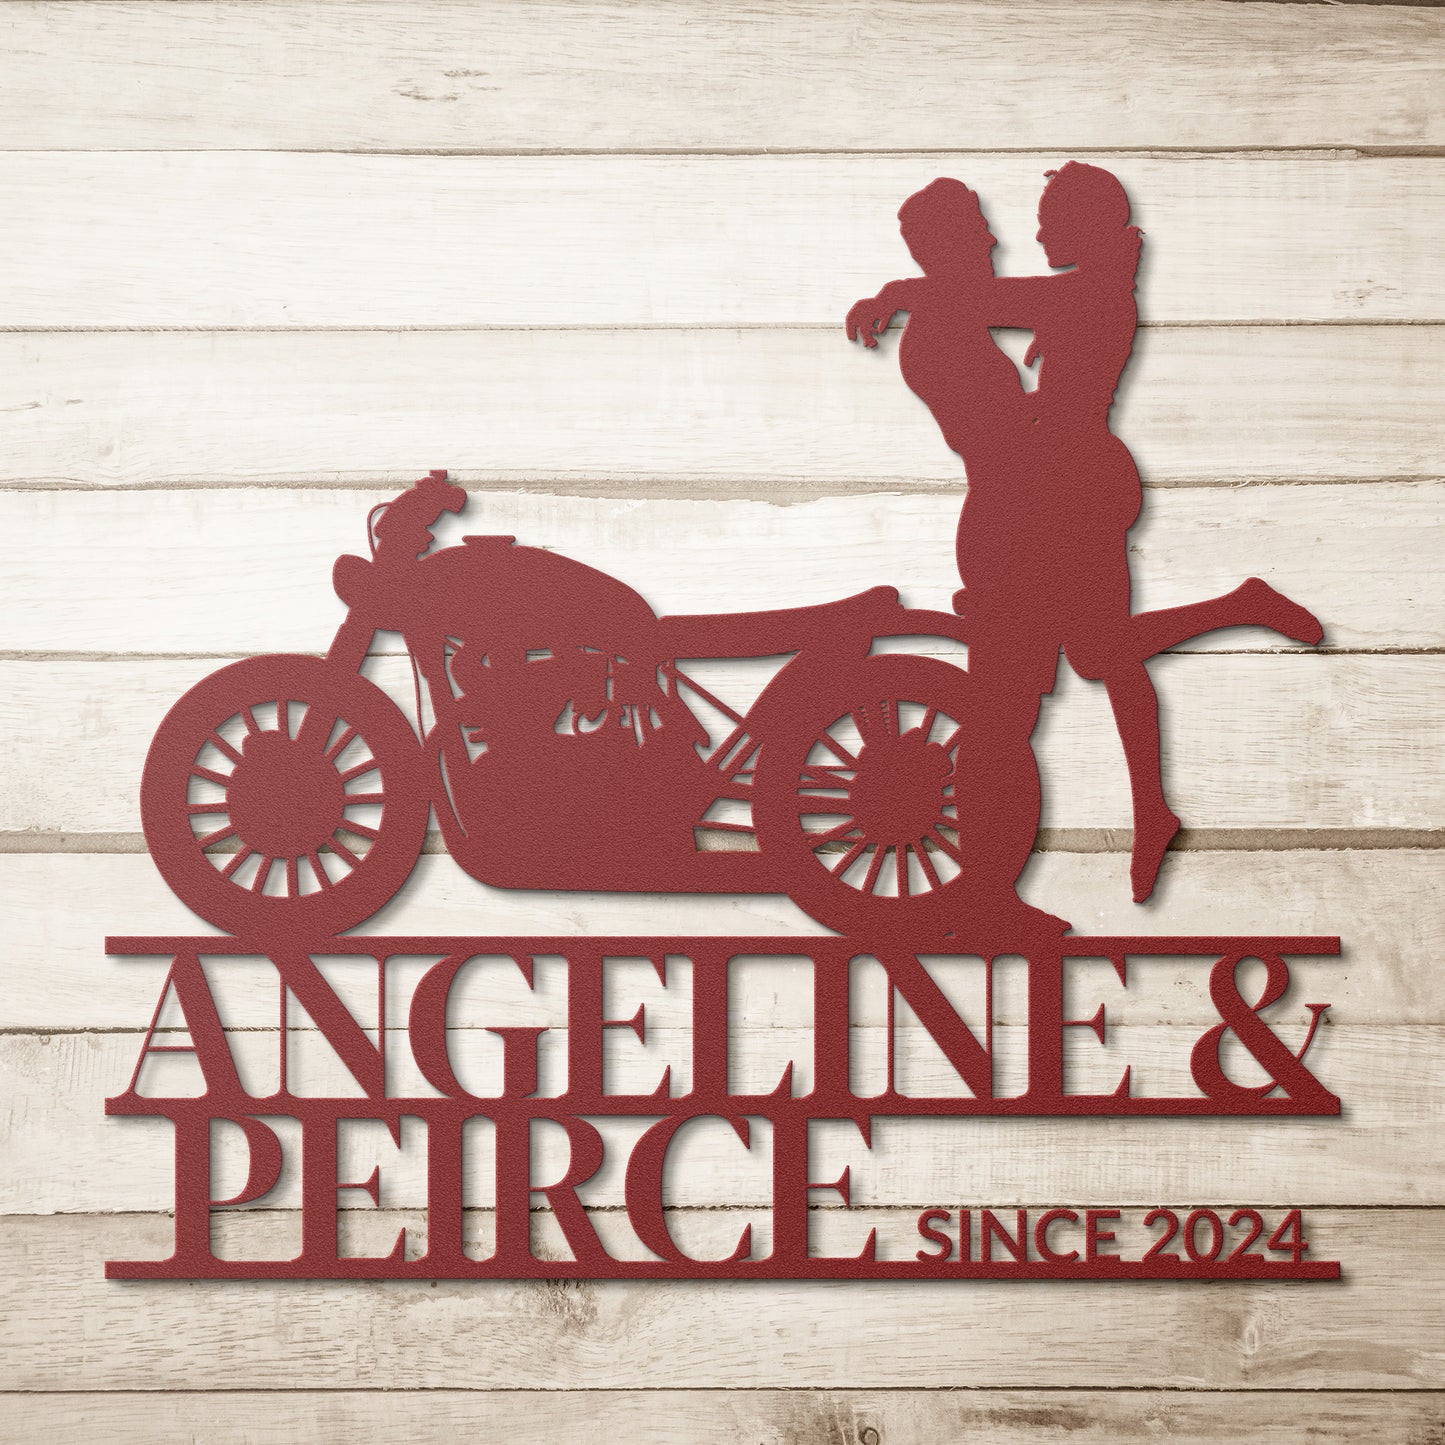 Golden Value SG's Custom Motorcycle Couple Metallic Wall Art, featuring a silhouette of a couple embracing beside a motorcycle with the text "angeline & peirce since 2024" below.